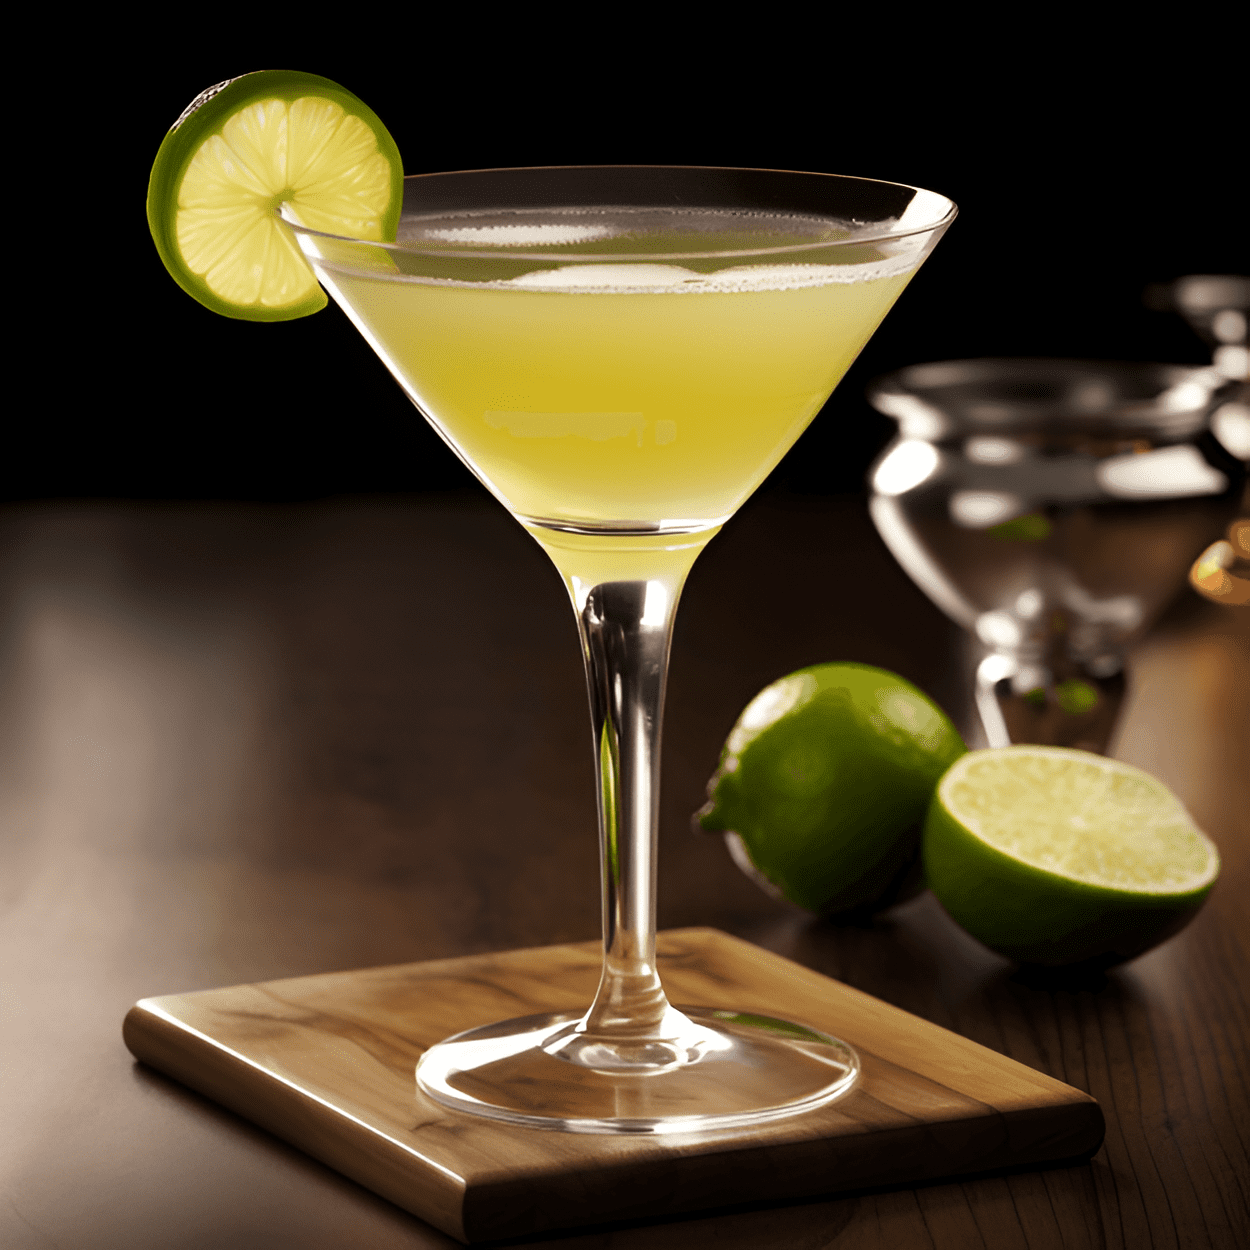 Jet Fuel Cocktail Recipe - The Jet Fuel is a strong, potent cocktail with a fiery kick. It's not for the faint-hearted, with its high-proof spirits delivering a powerful punch. The taste is complex, with the burn of the alcohol balanced by the sweetness of the liqueur and the tartness of the lime juice.